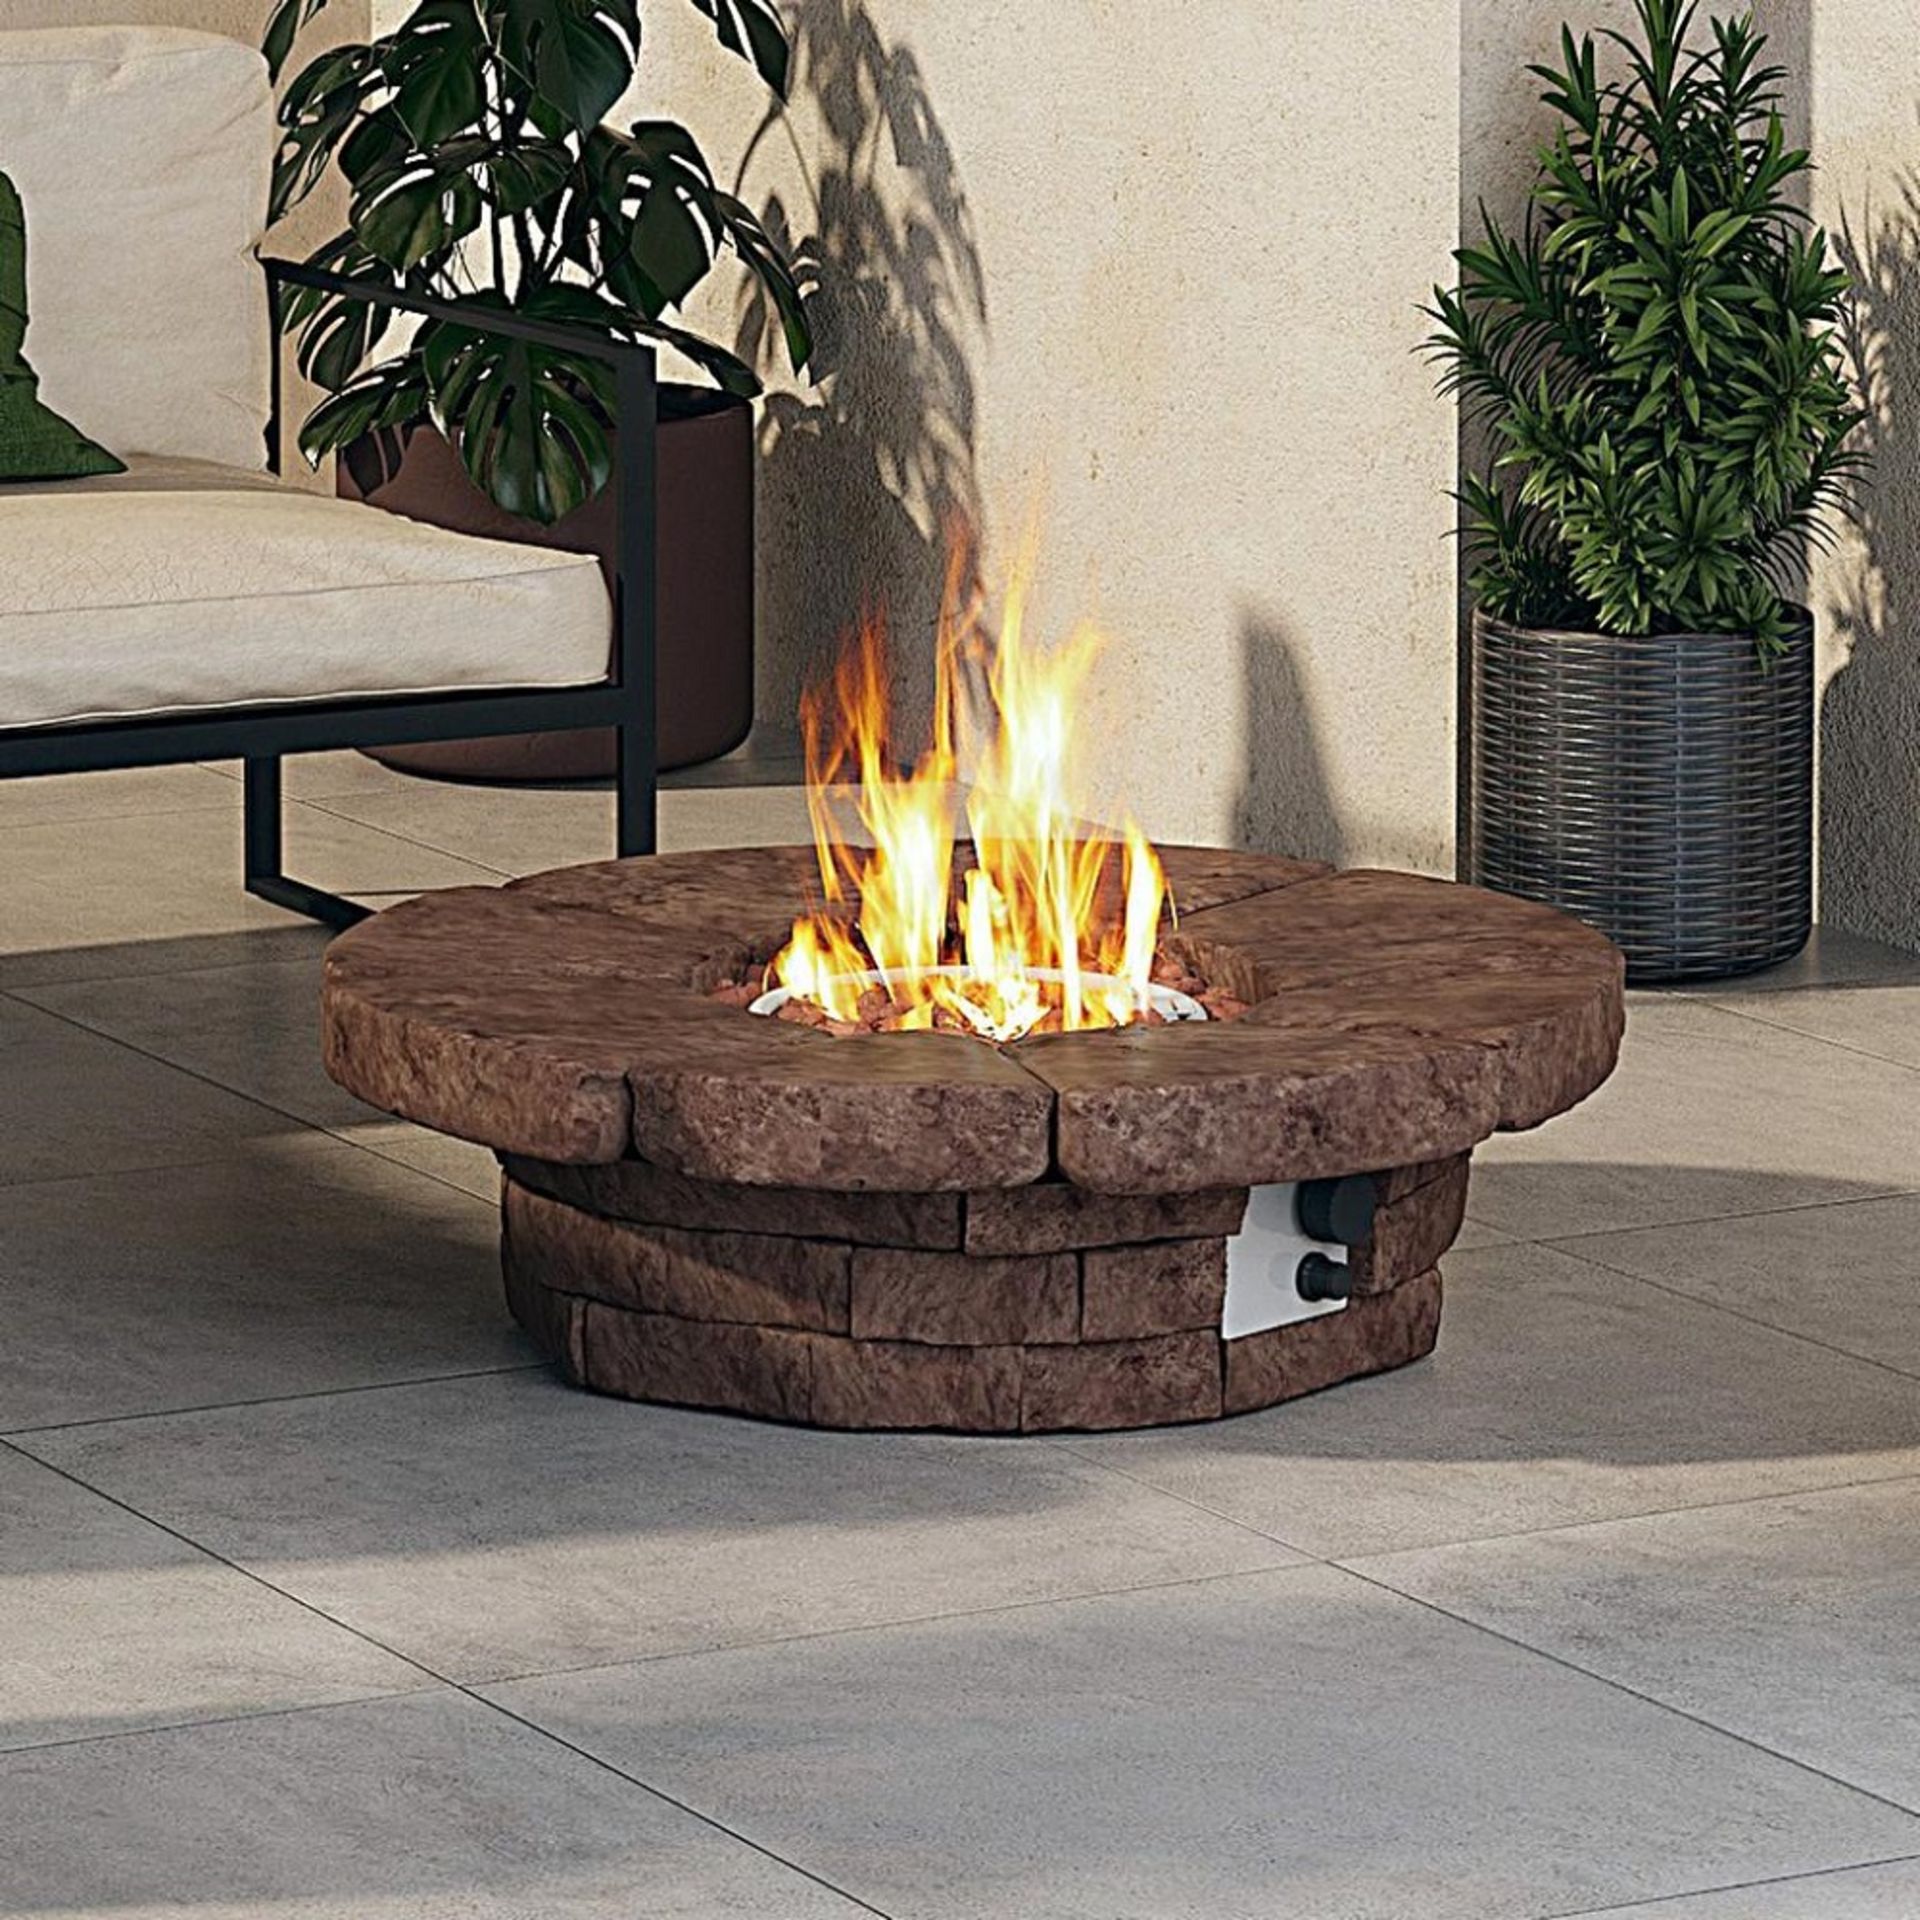 Brand New Large Round Gas Firepit Heater RRP £347 Stone Concrete Effect Outdoor Garden Patio Heater - Image 6 of 7